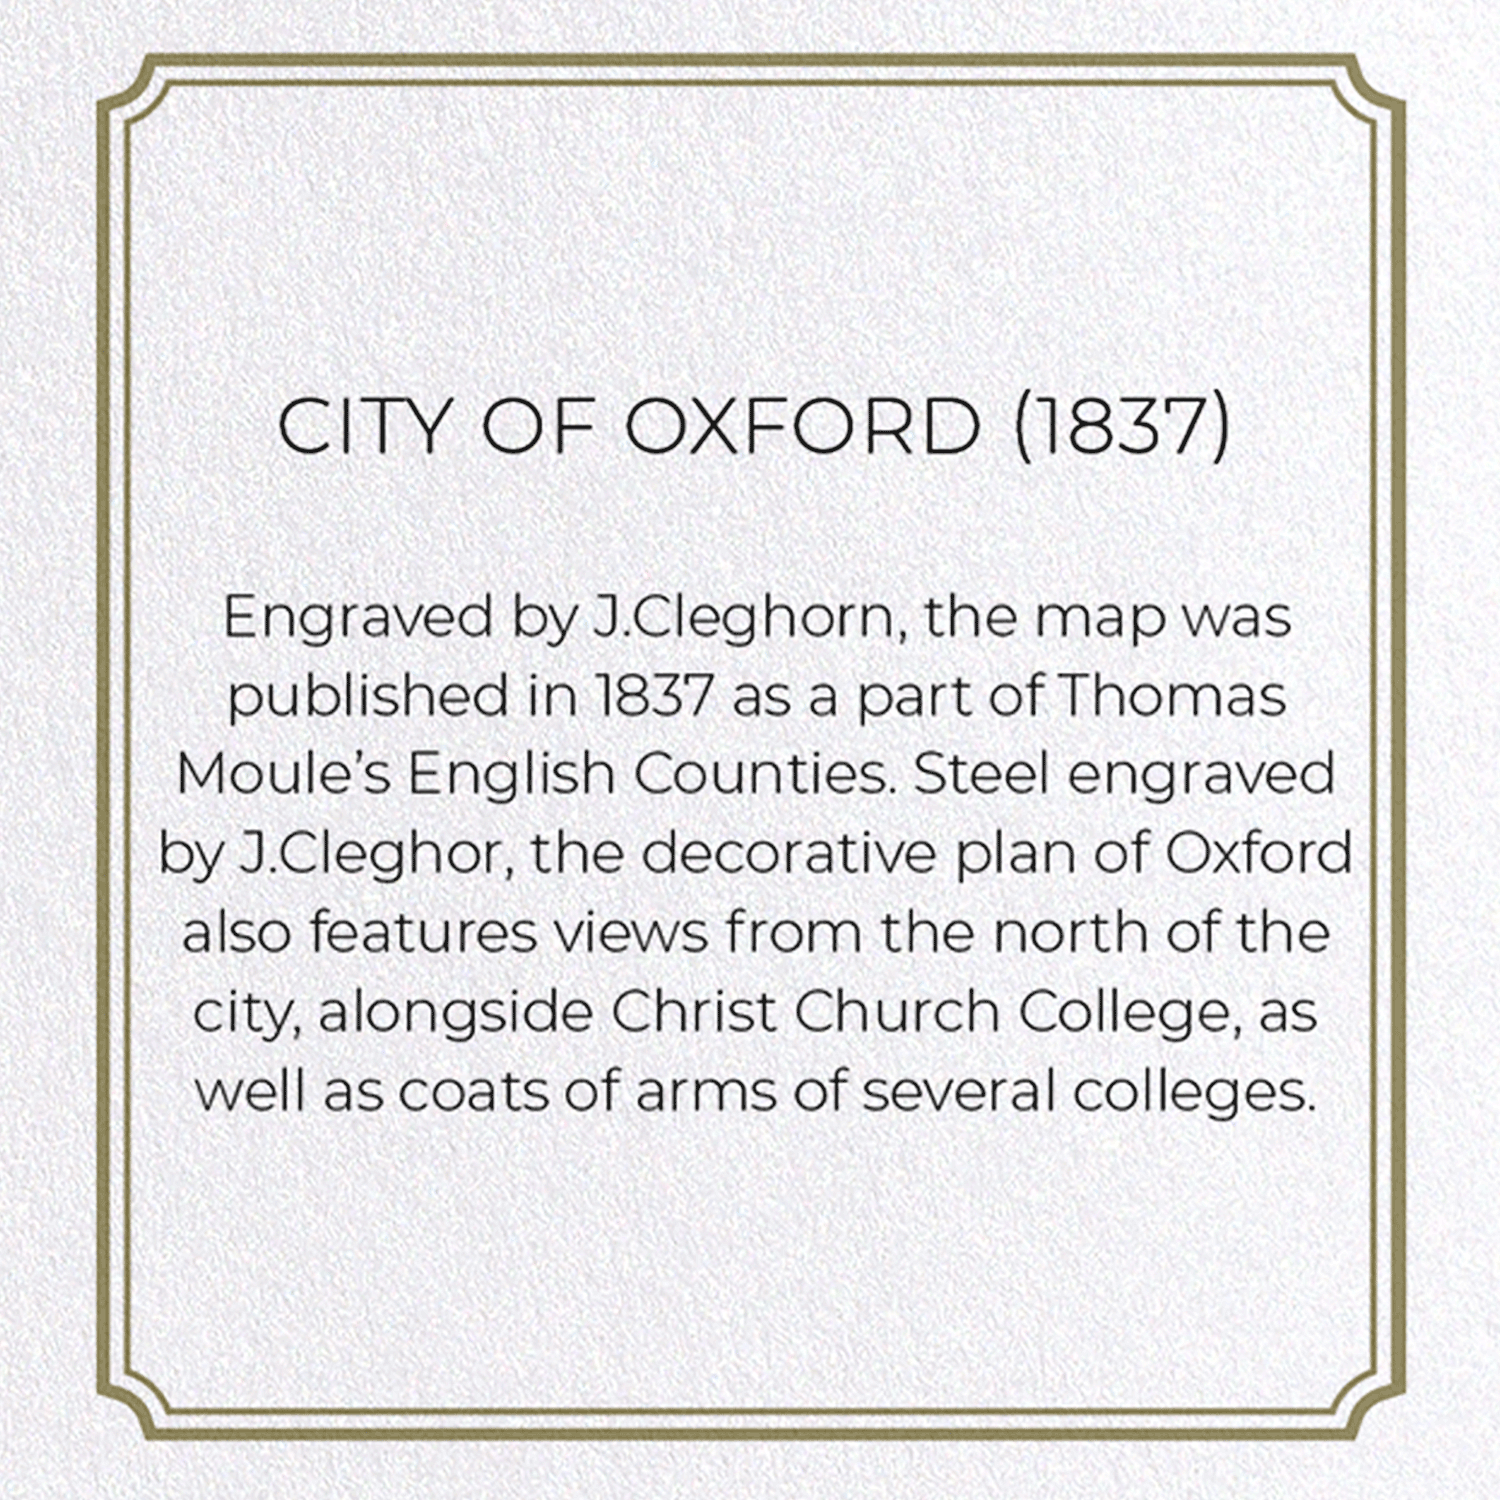 CITY OF OXFORD (1837)